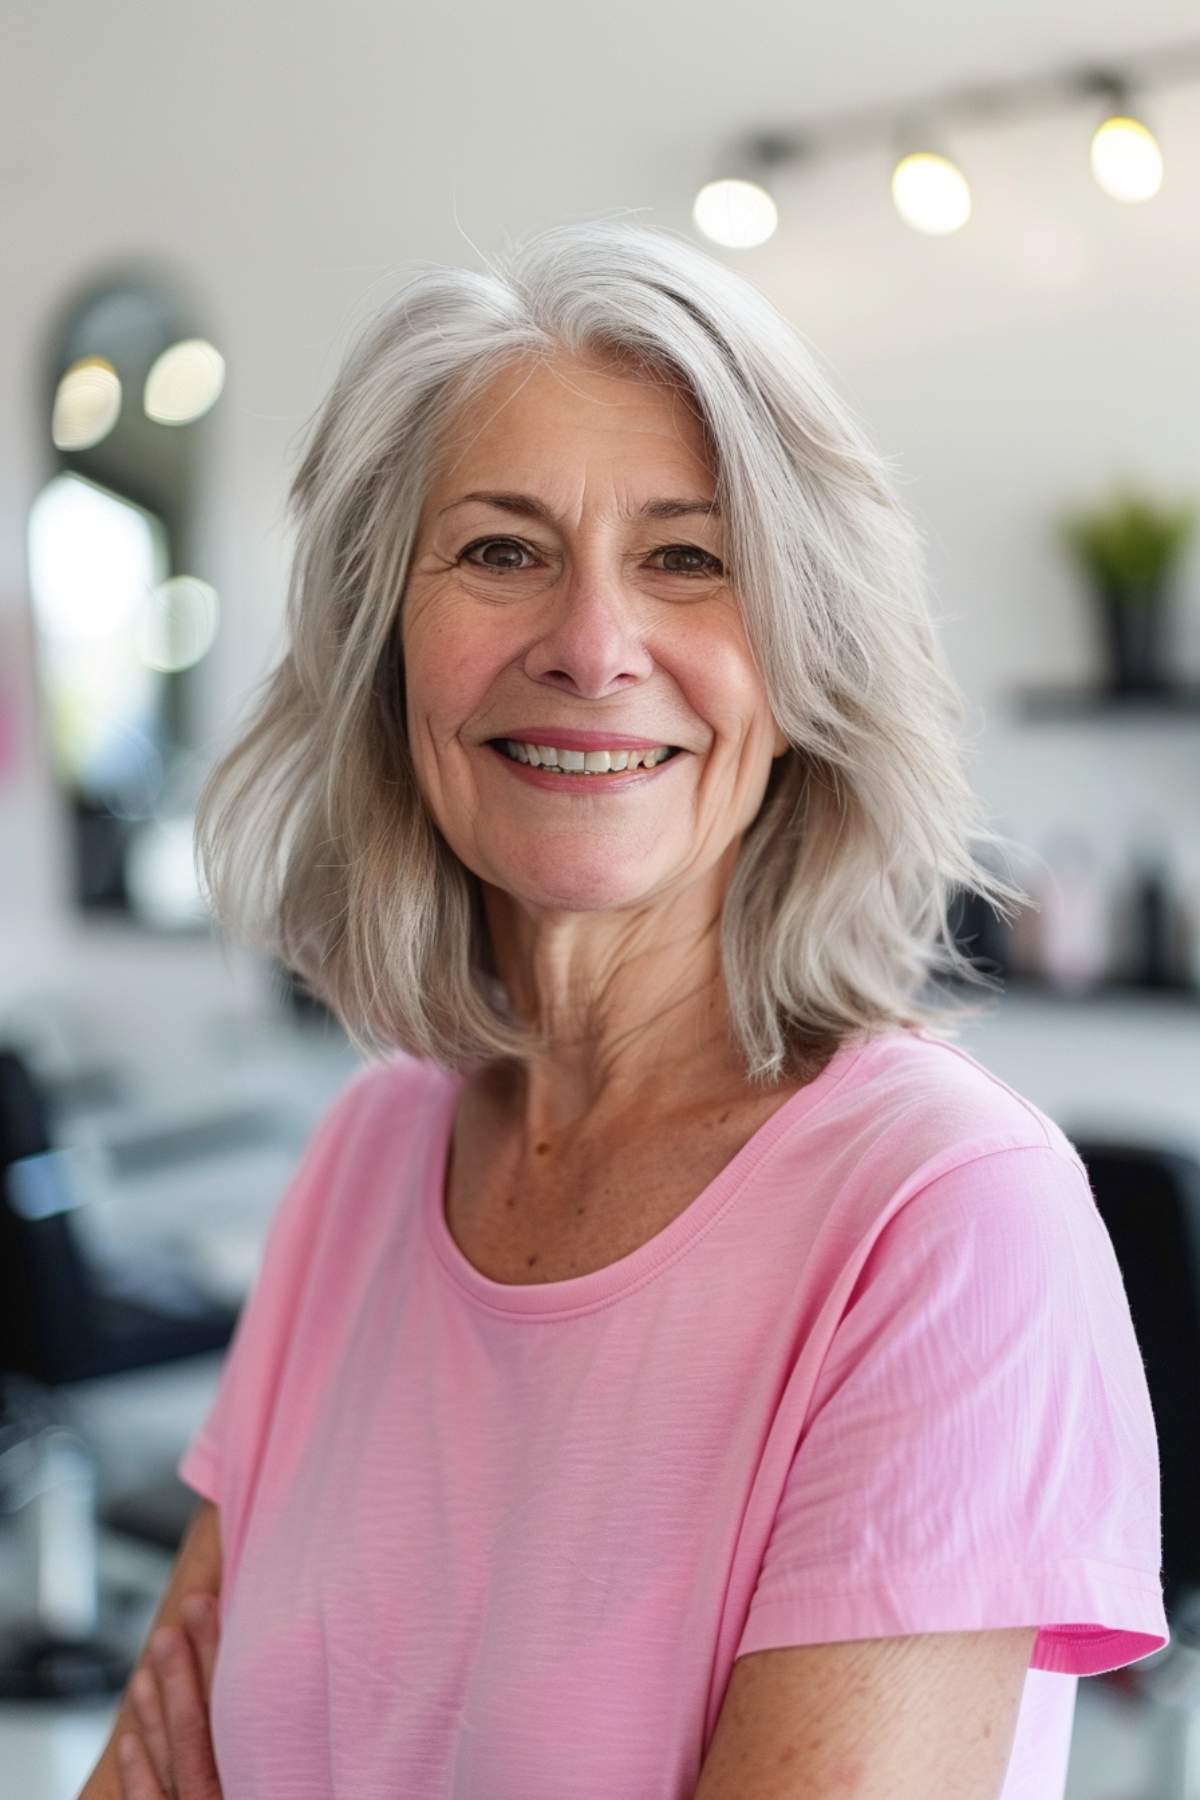 Sahag cut for women over 60 with fine hair features soft waves and subtle layers.